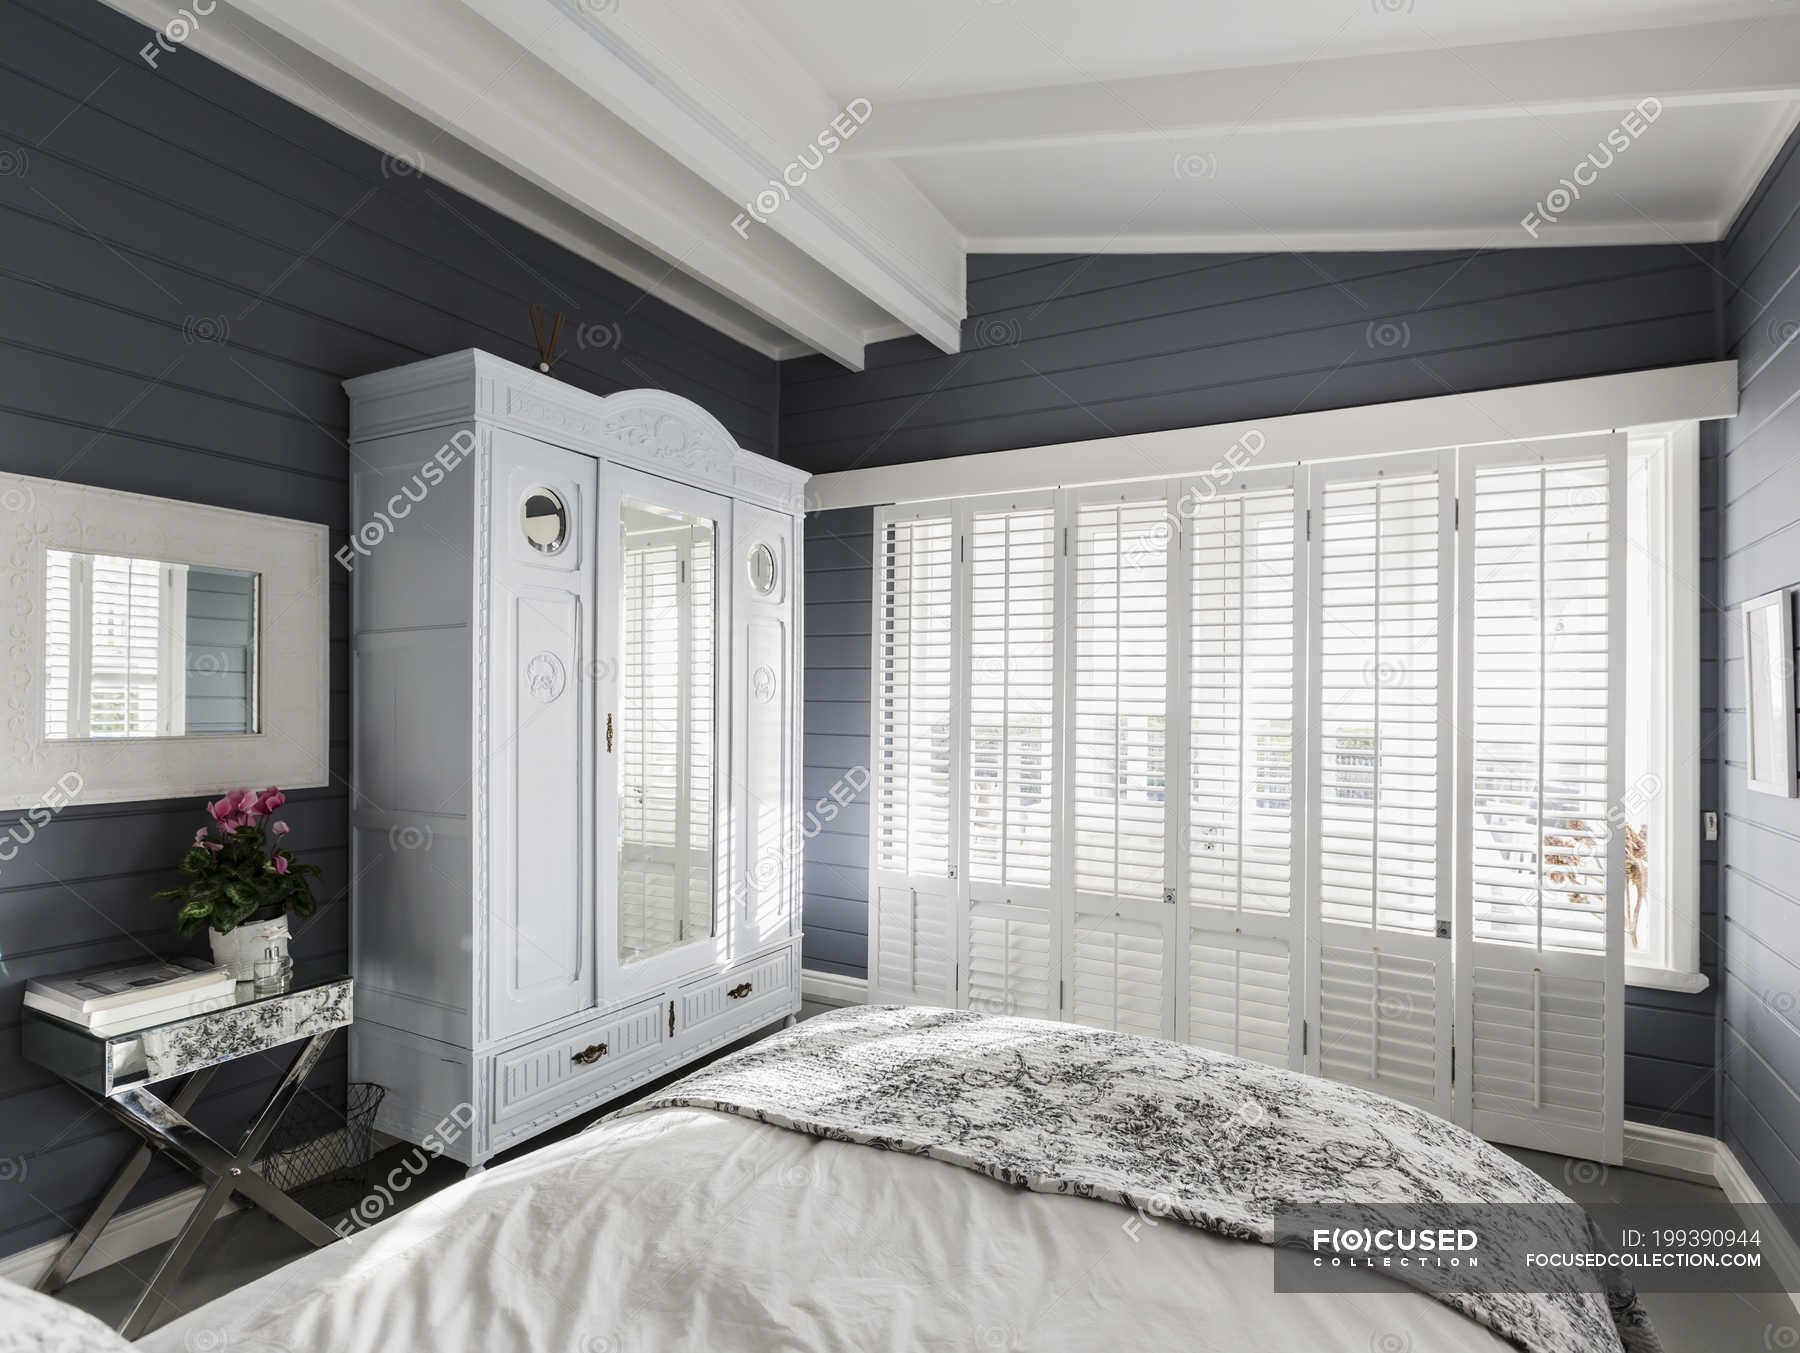 Luxury Home Showcase Bedroom With White Wood Shutters And Vaulted